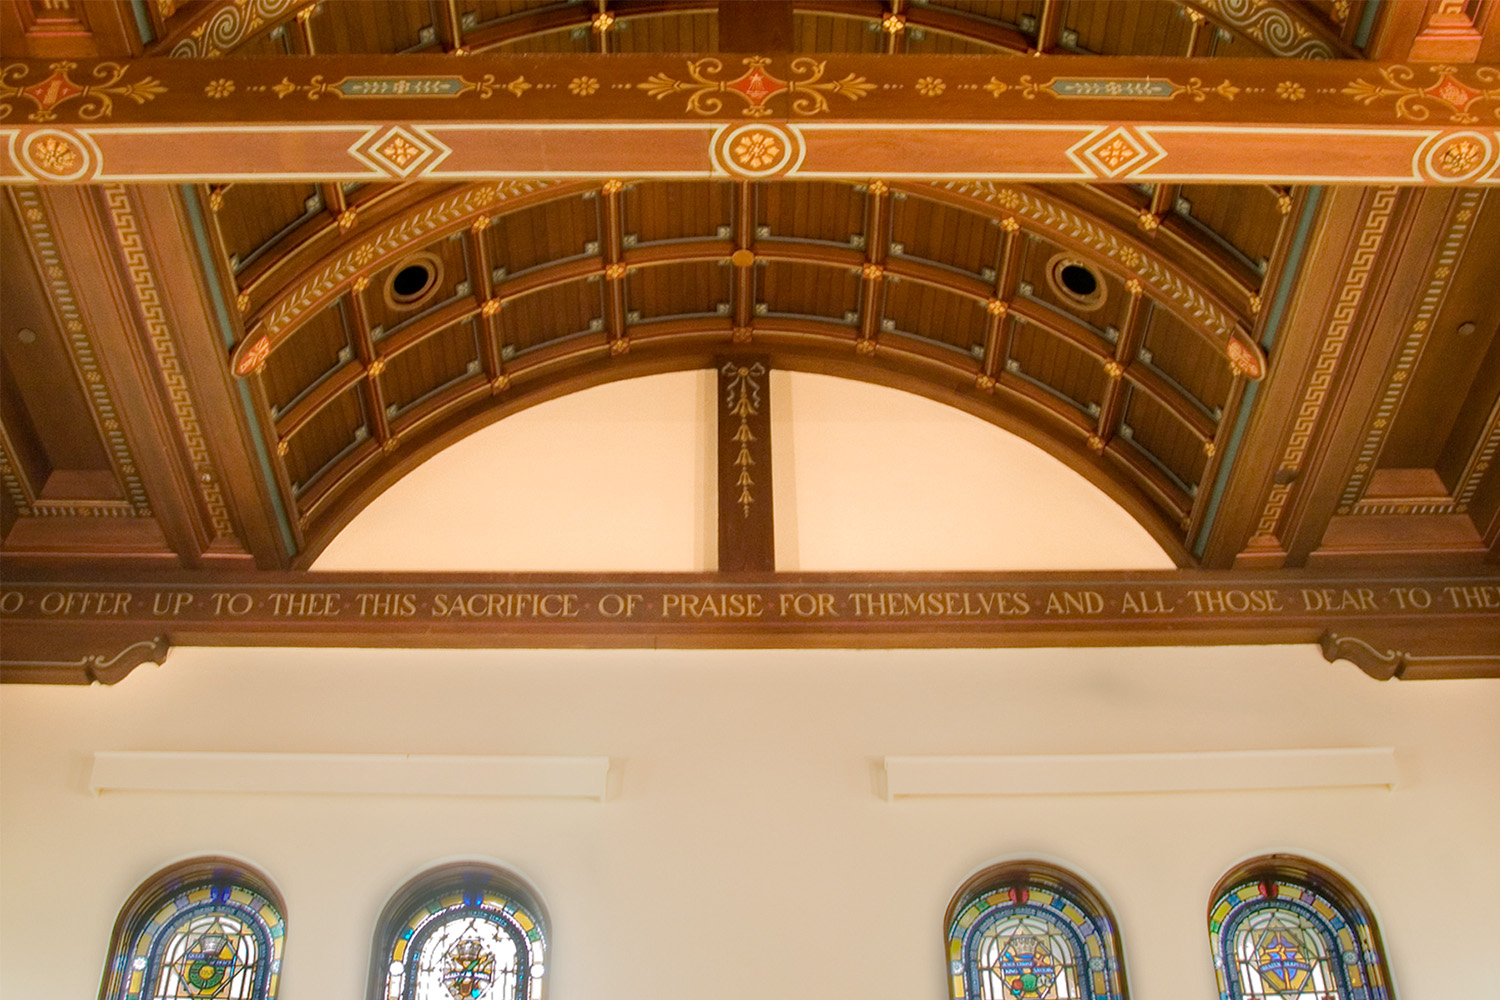 Zoomed-in view of woodwork detailing in chapel ceiling with holy scripture engraved 
